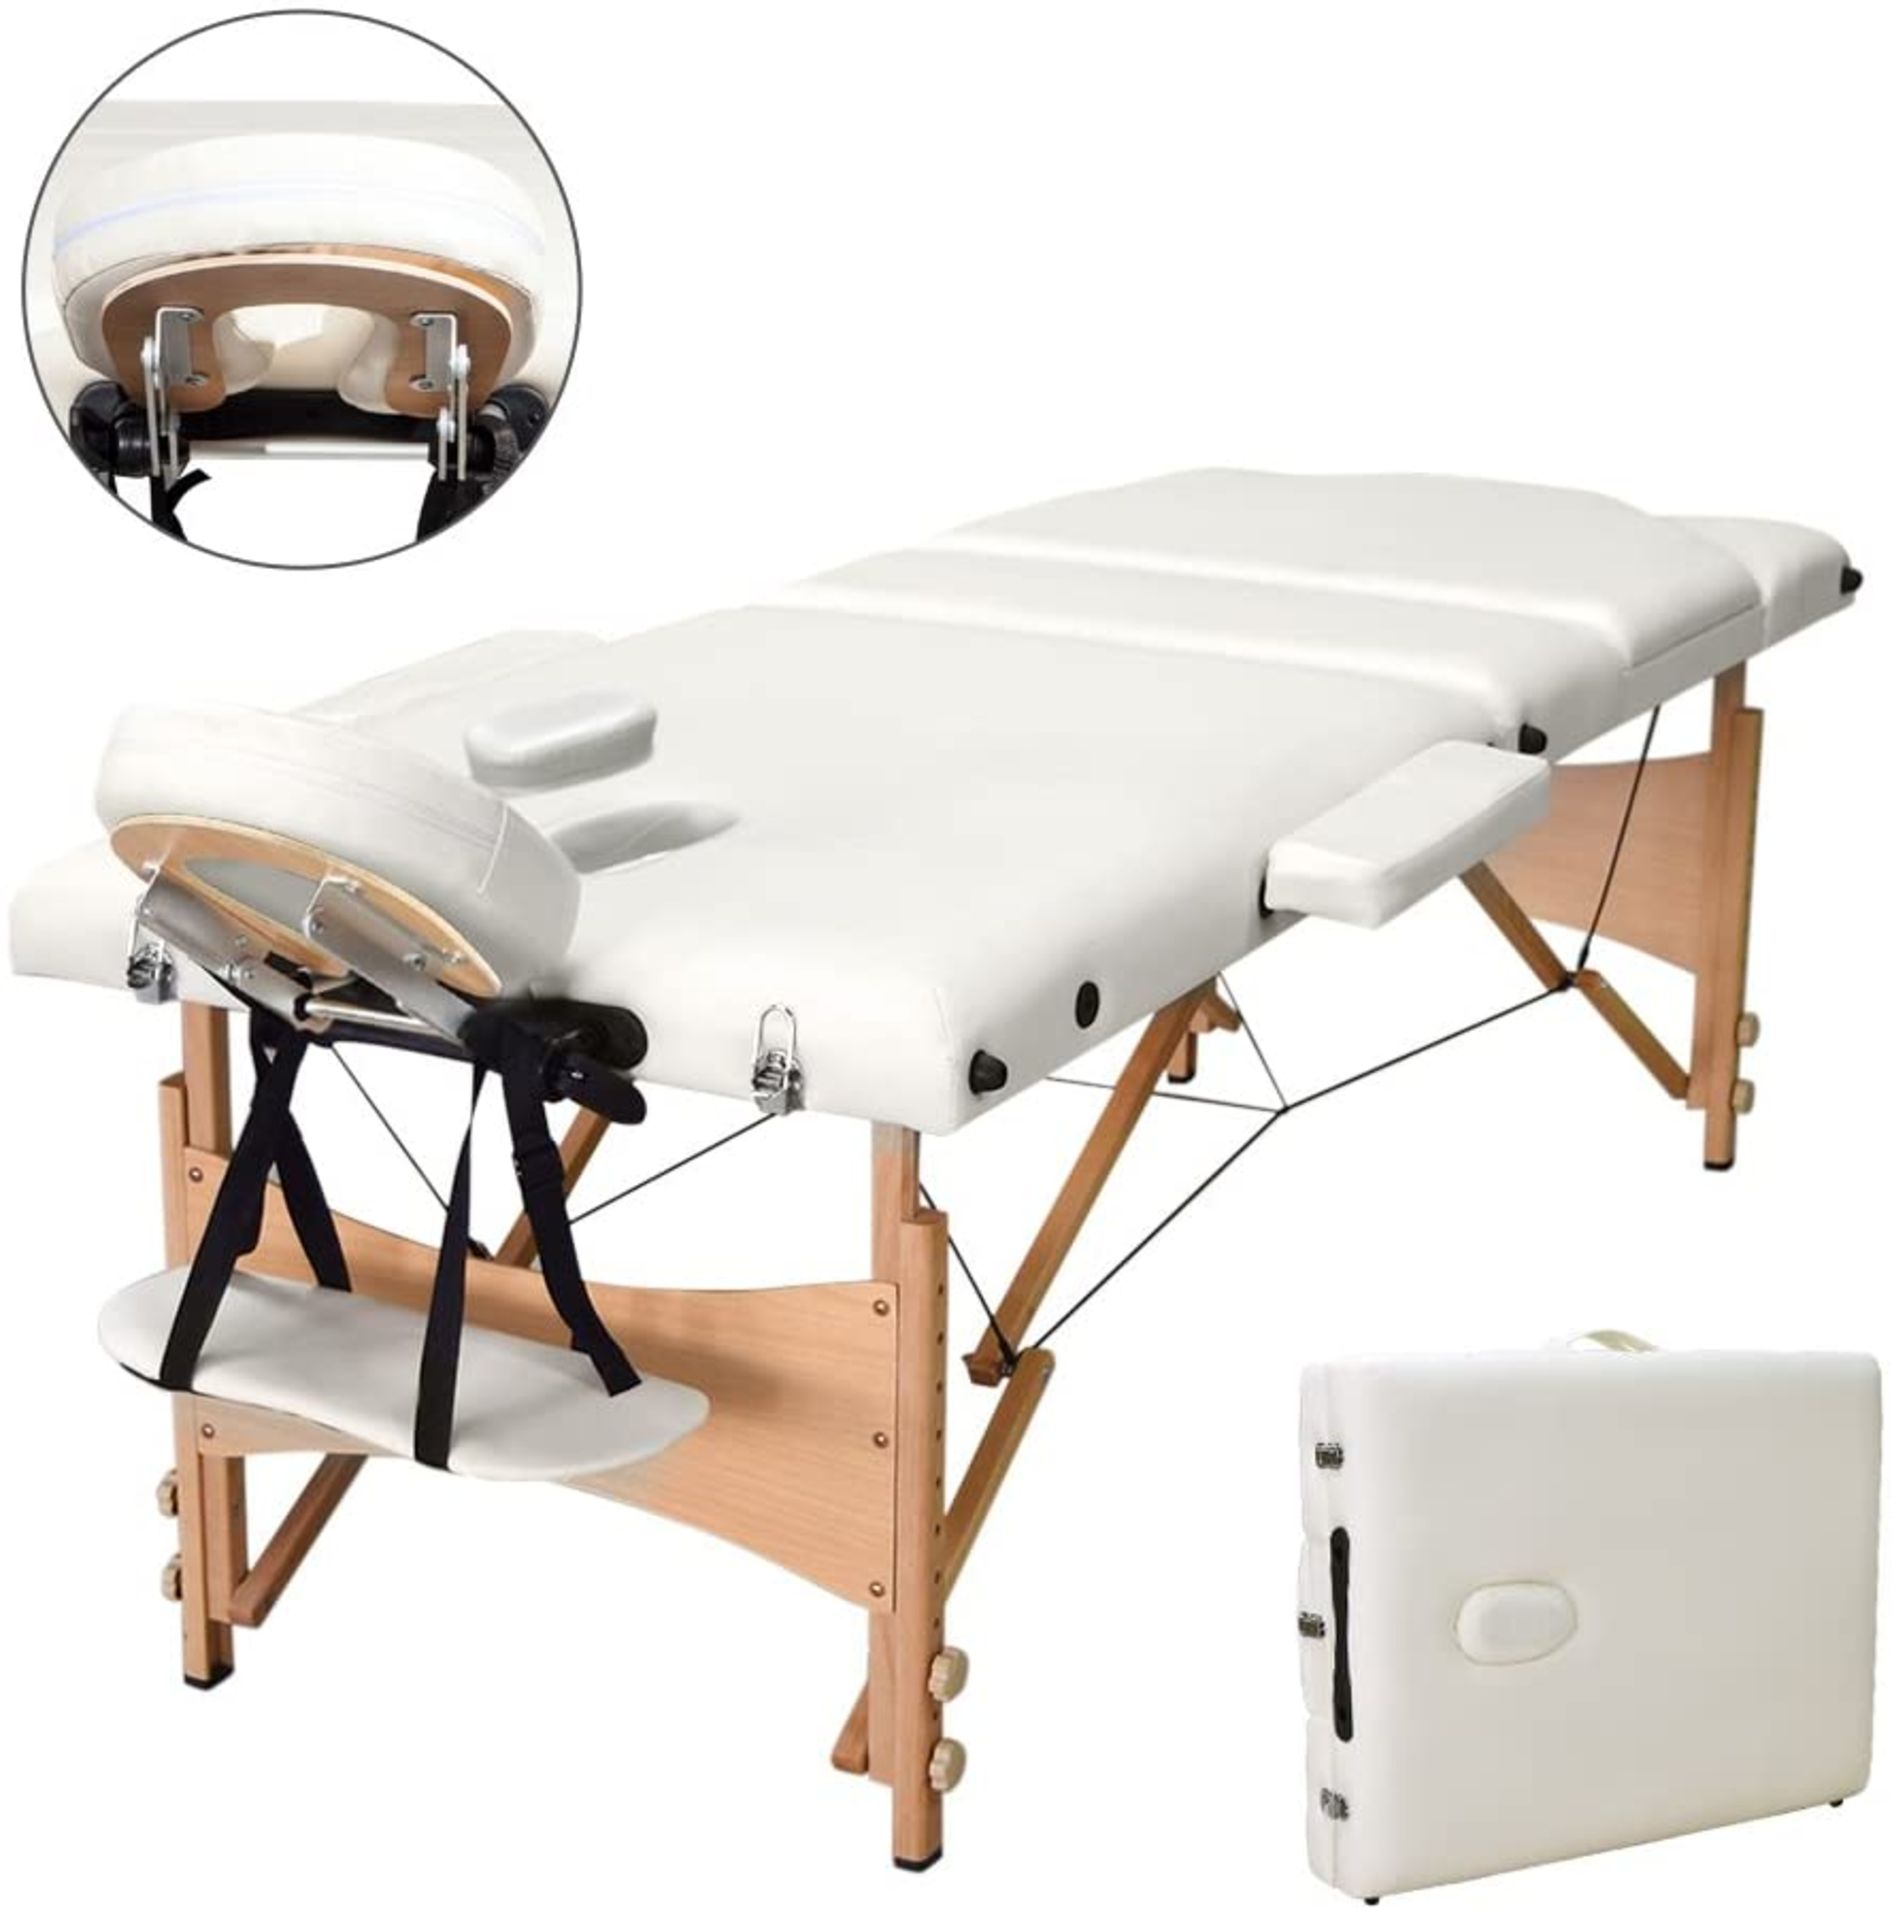 RRP £119.99 Vesgantti Portable Massage Bed Table - 3-Section Foldable Beauty Couch